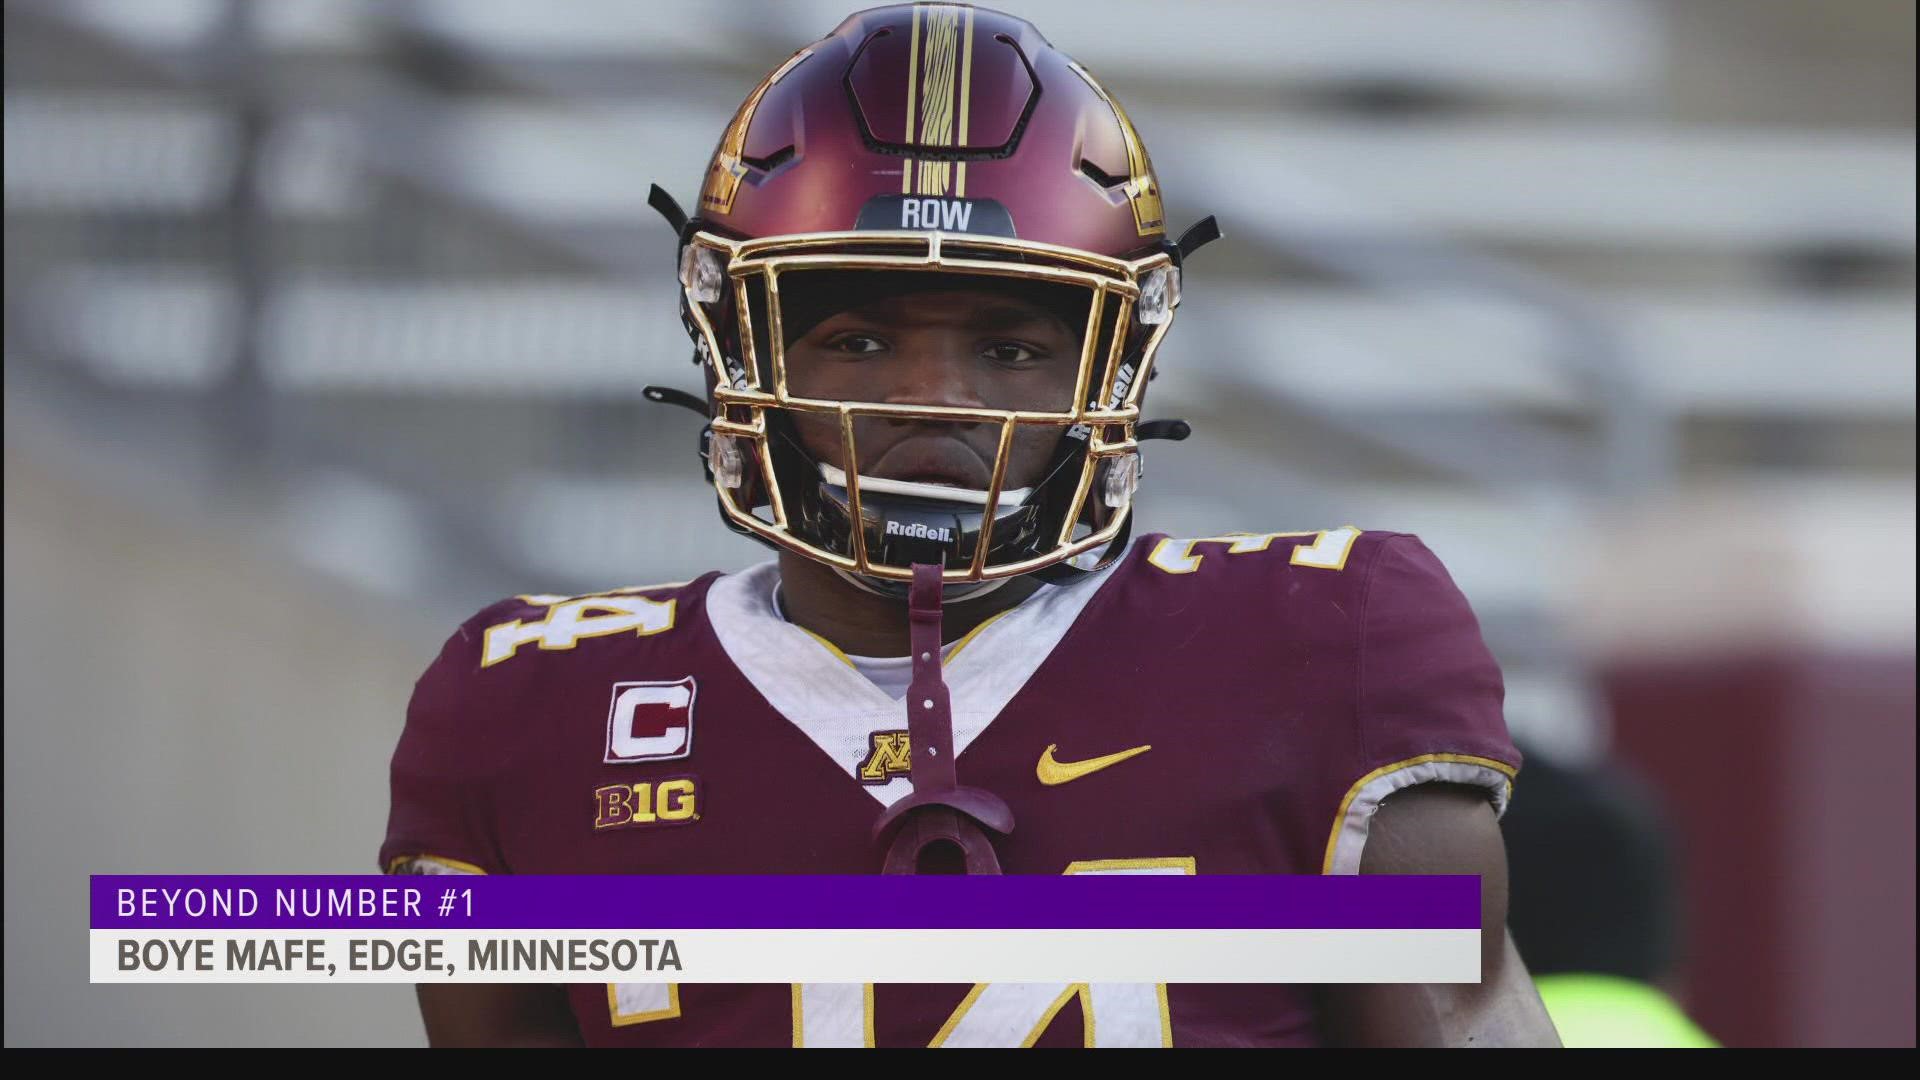 Boye Mafe is an American college football defensive end for the Minnesota Golden Gophers.